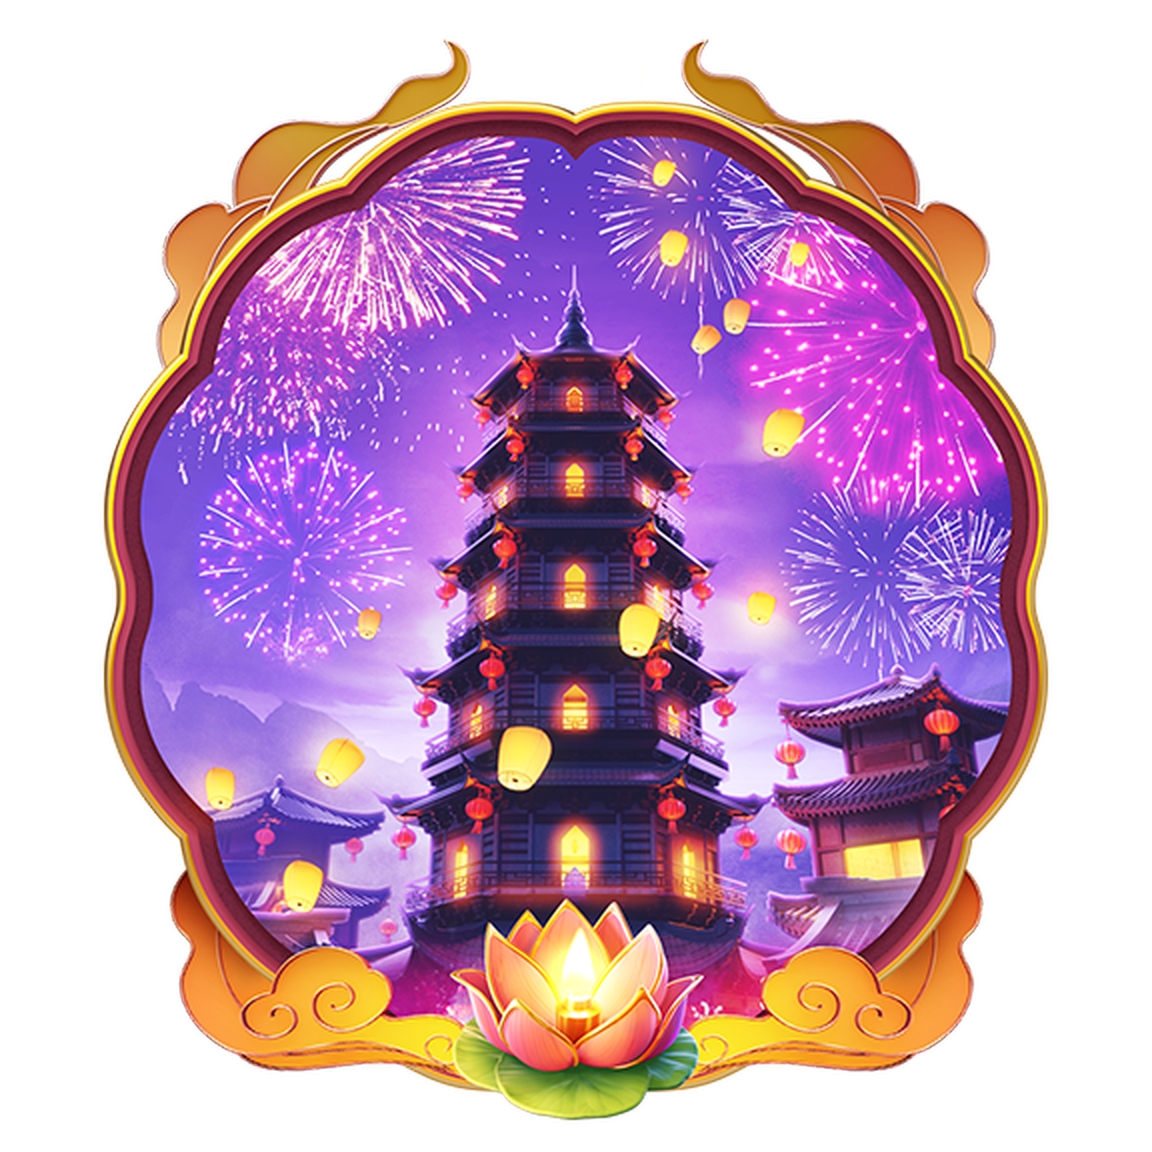 The Wild Fireworks Online Slot Demo Game by PG Soft